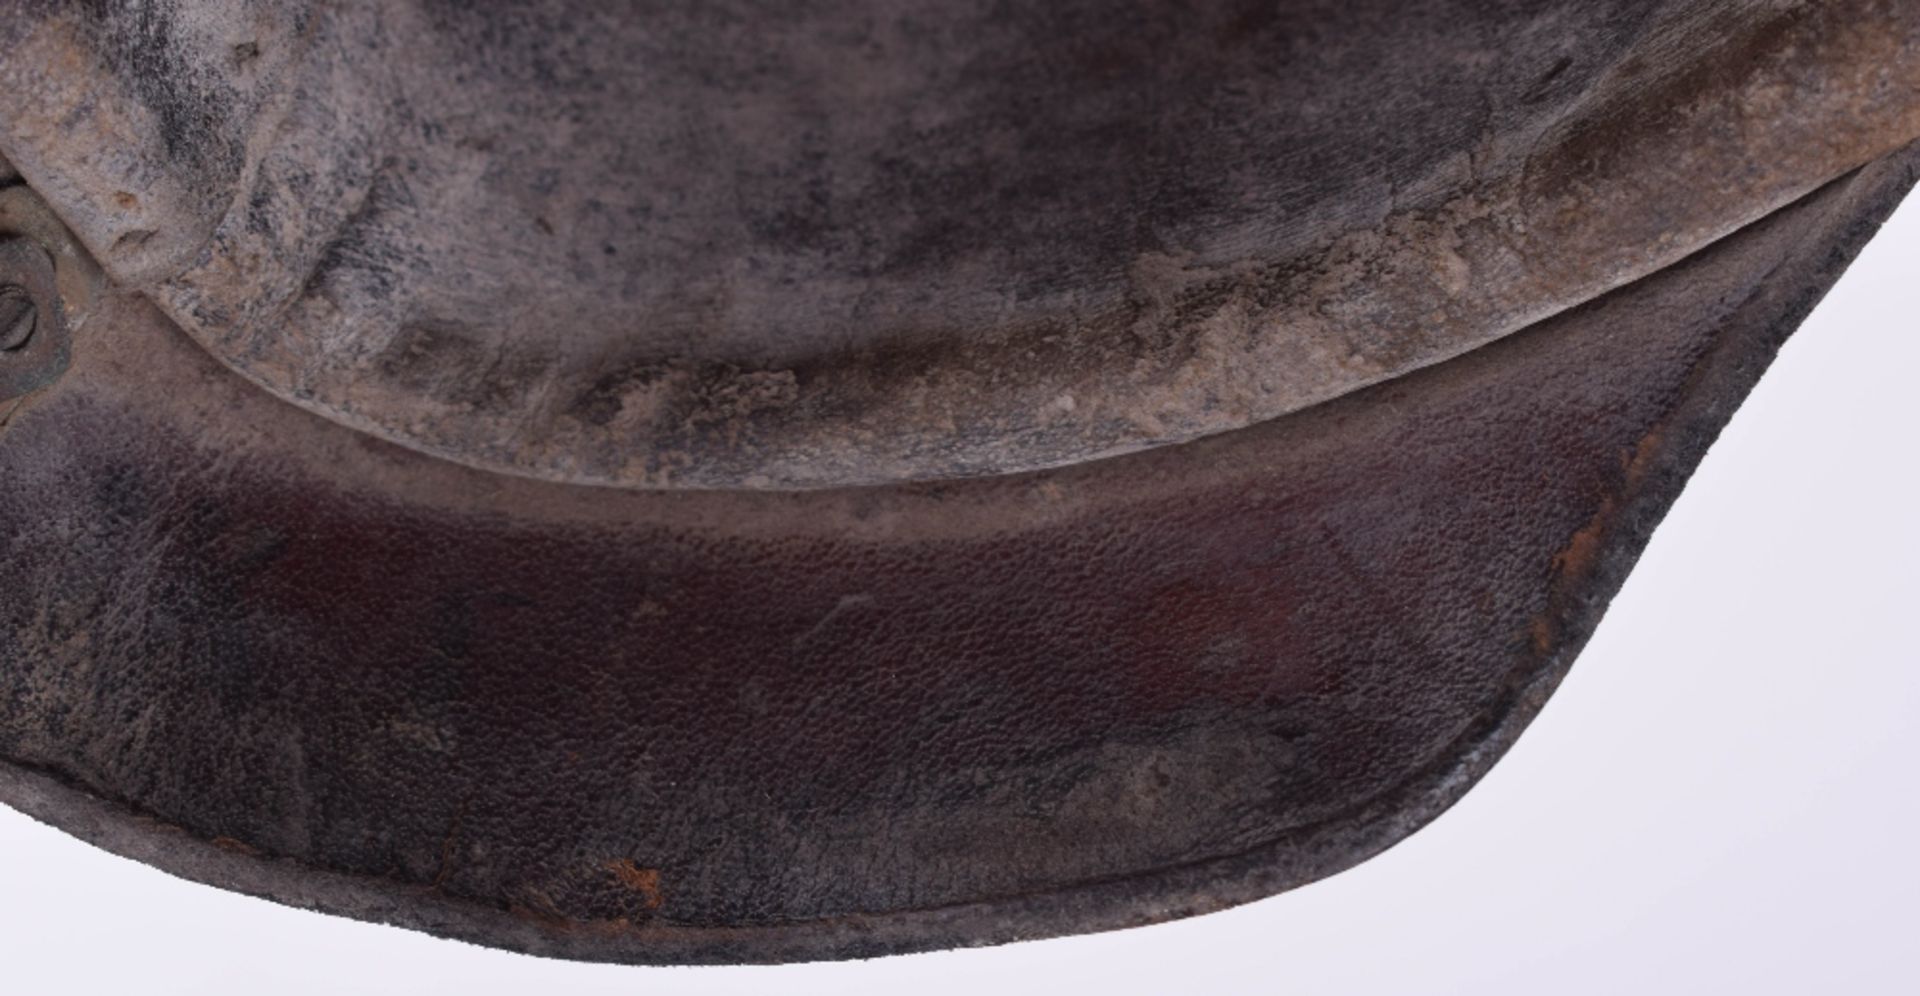 Battlefield Pick-Up Prussian Enlisted Mans Pickelhaube with an Original Numbered Field Cover - Image 21 of 30